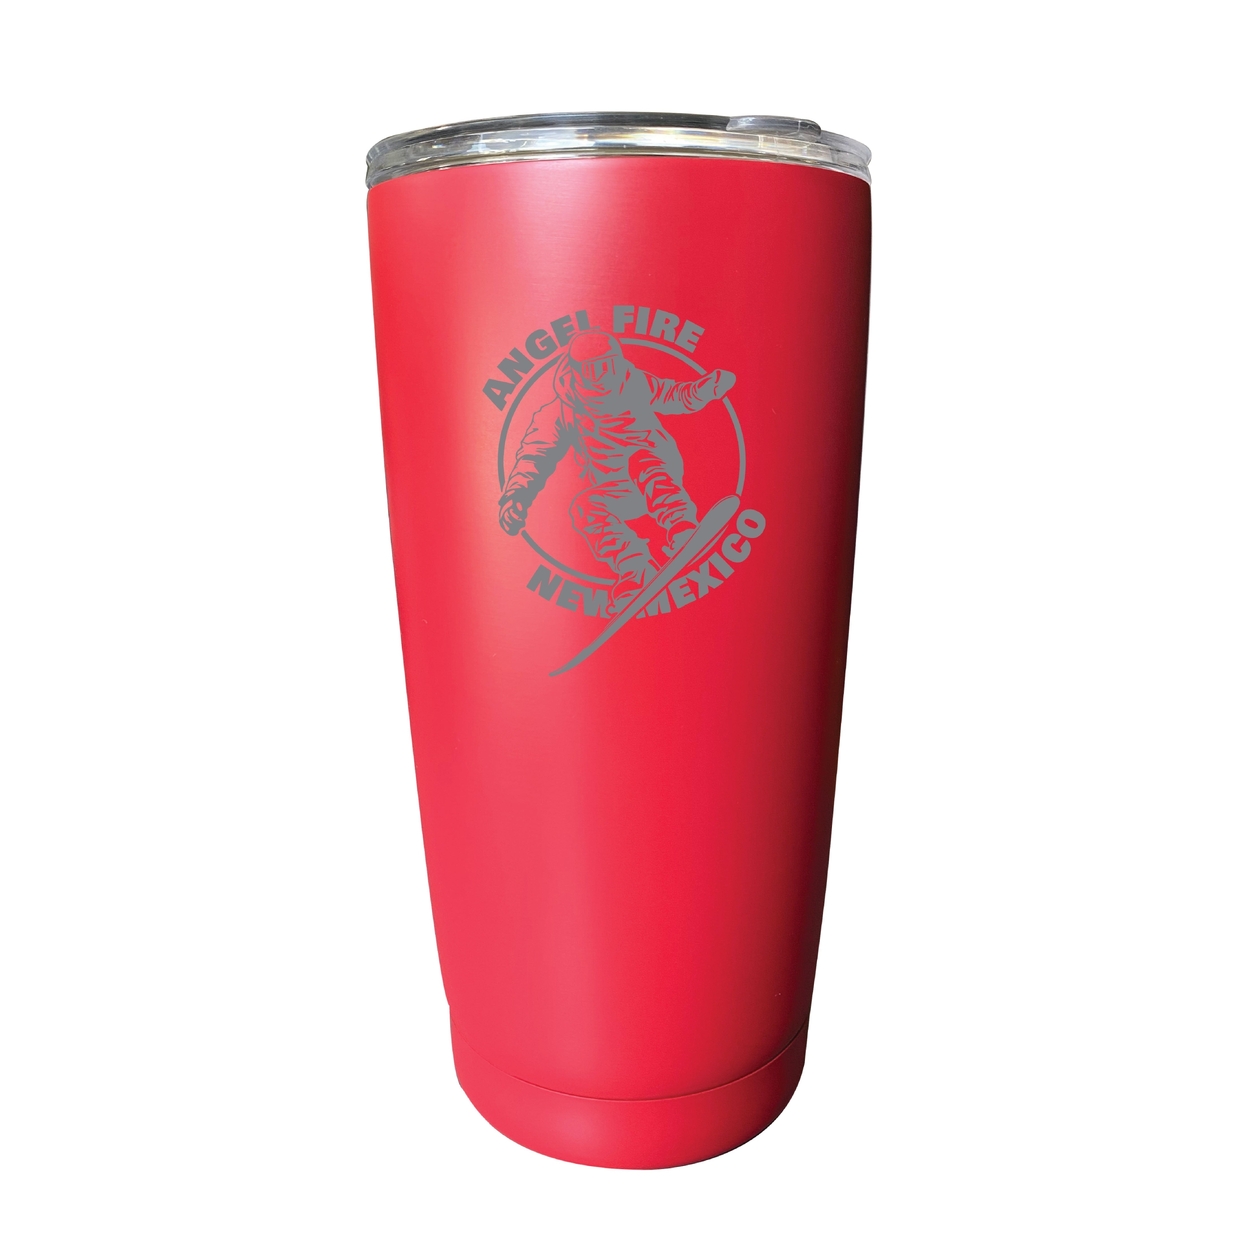 Angel Fire New Mexico Souvenir 16 Oz Engraved Stainless Steel Insulated Tumbler - Red,,2-Pack